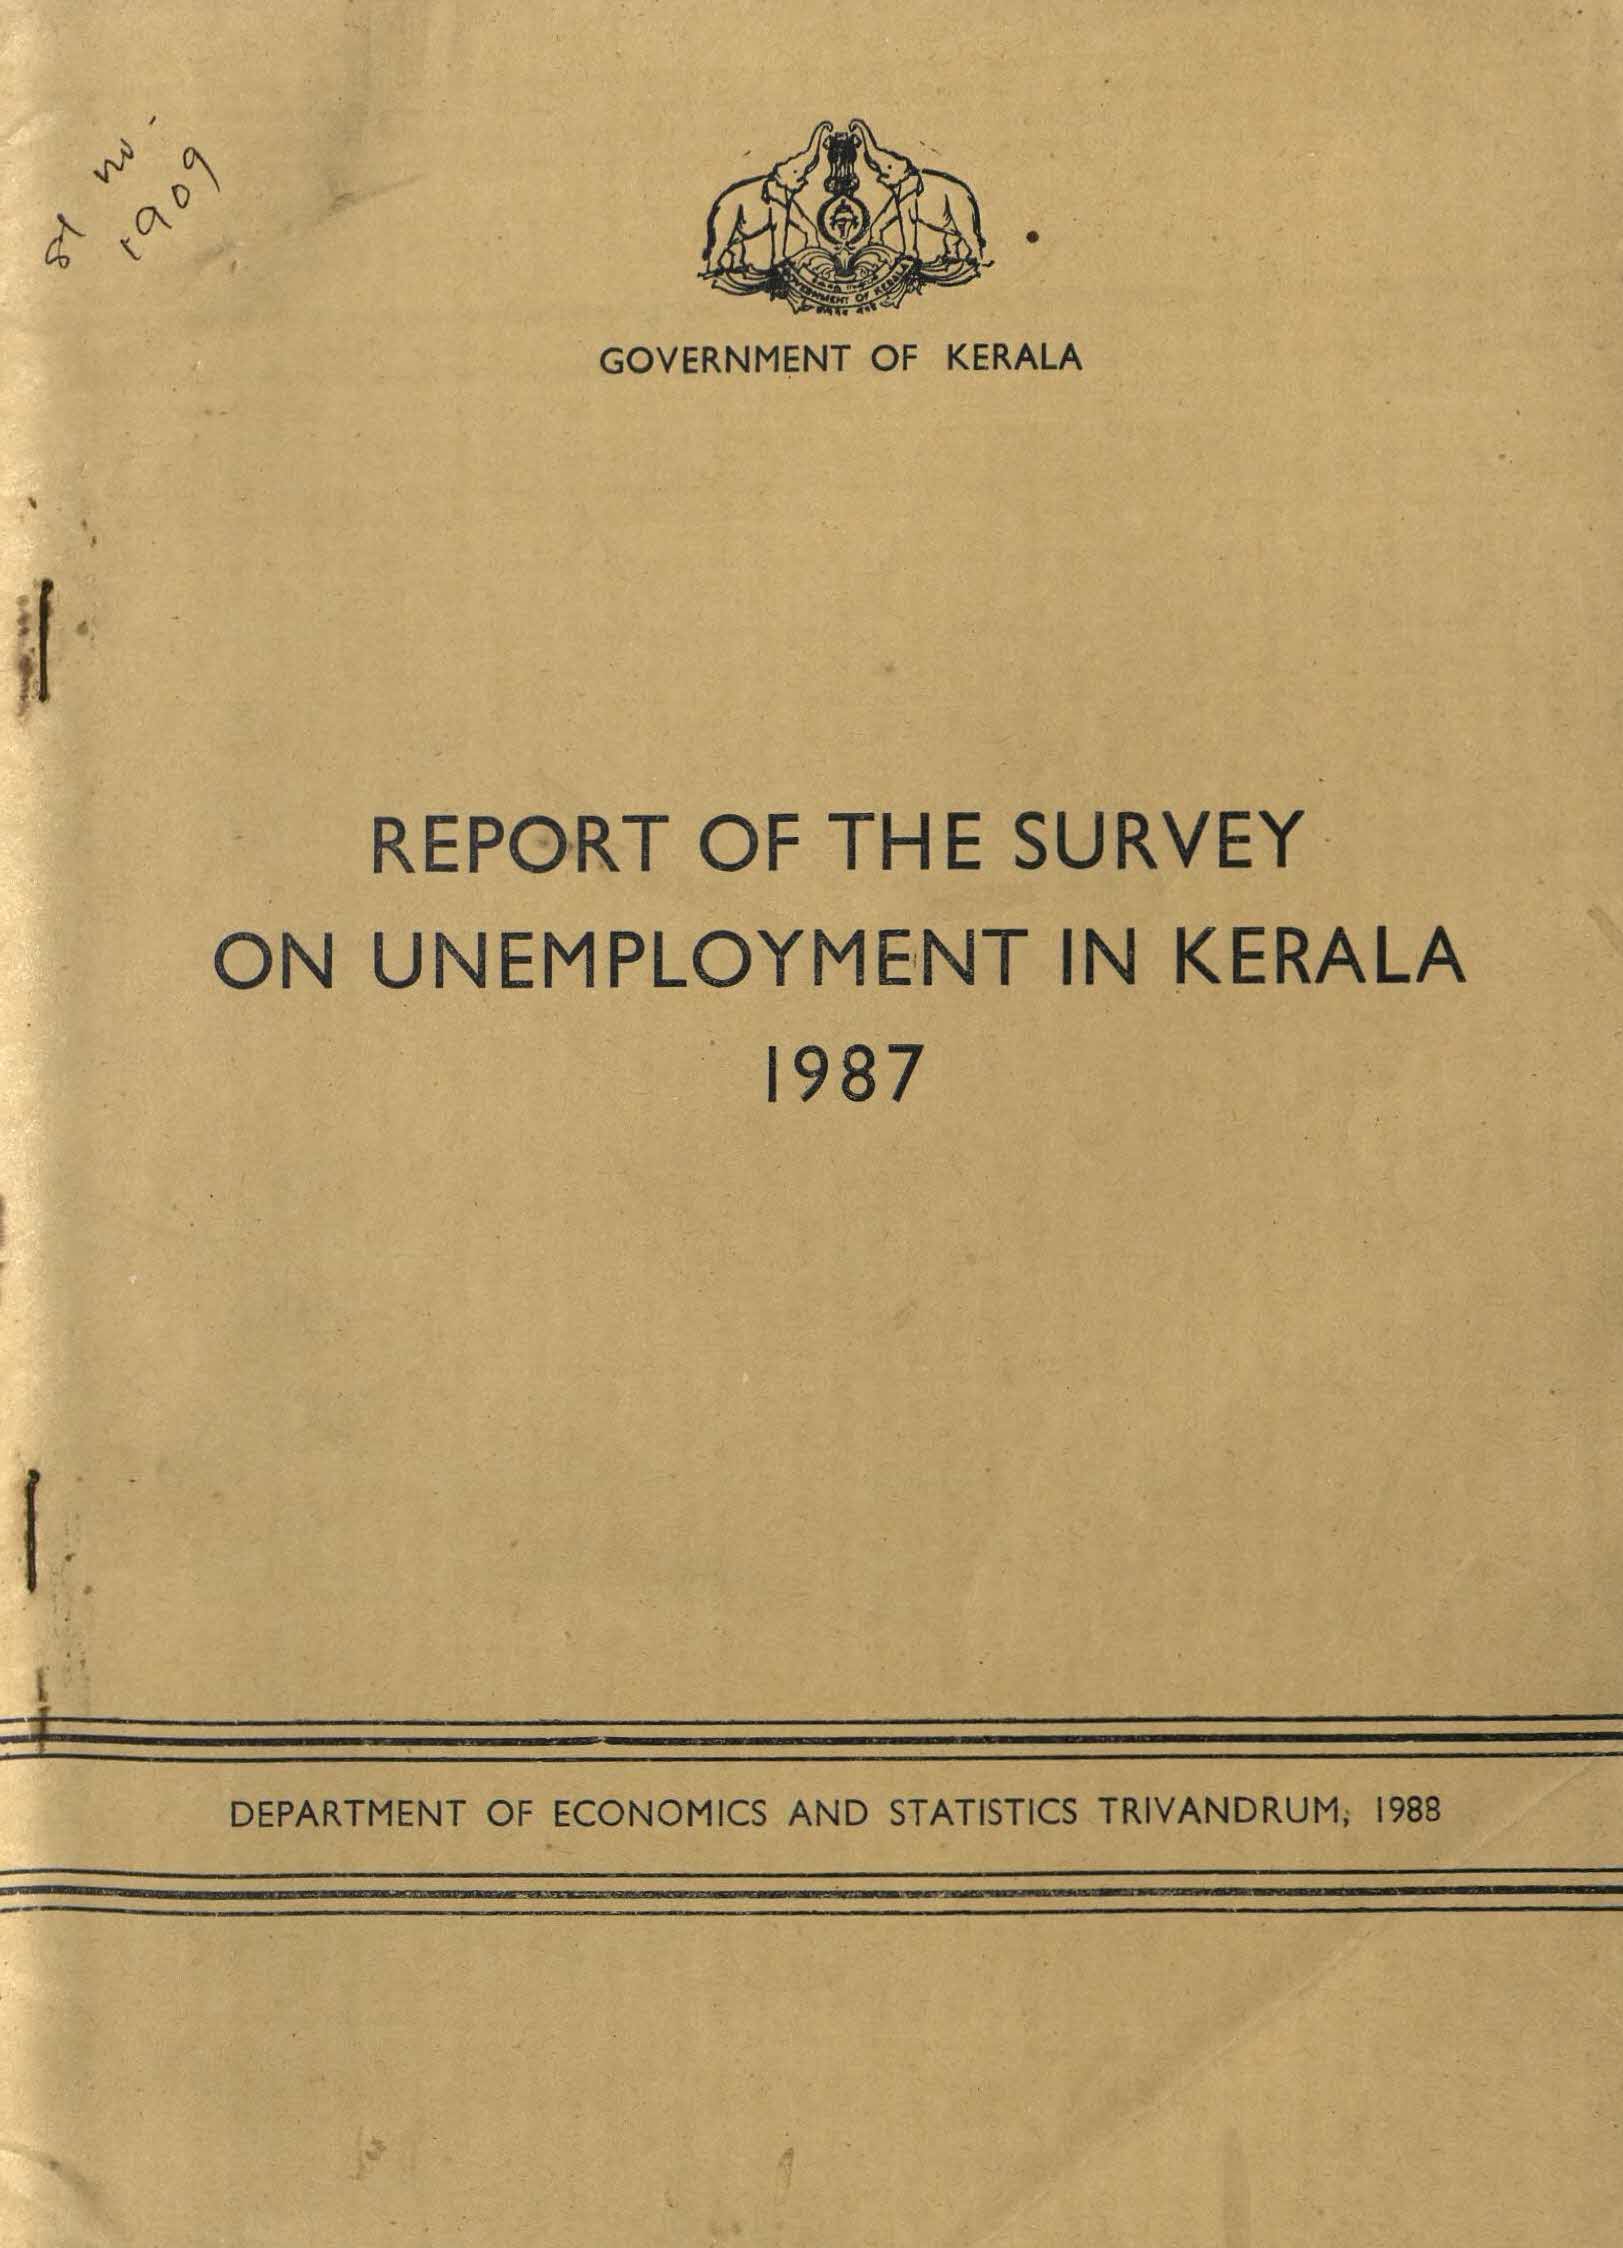 REPORT ON THE SURVEY ON UNEMPLOYMENT IN KERALA 1987